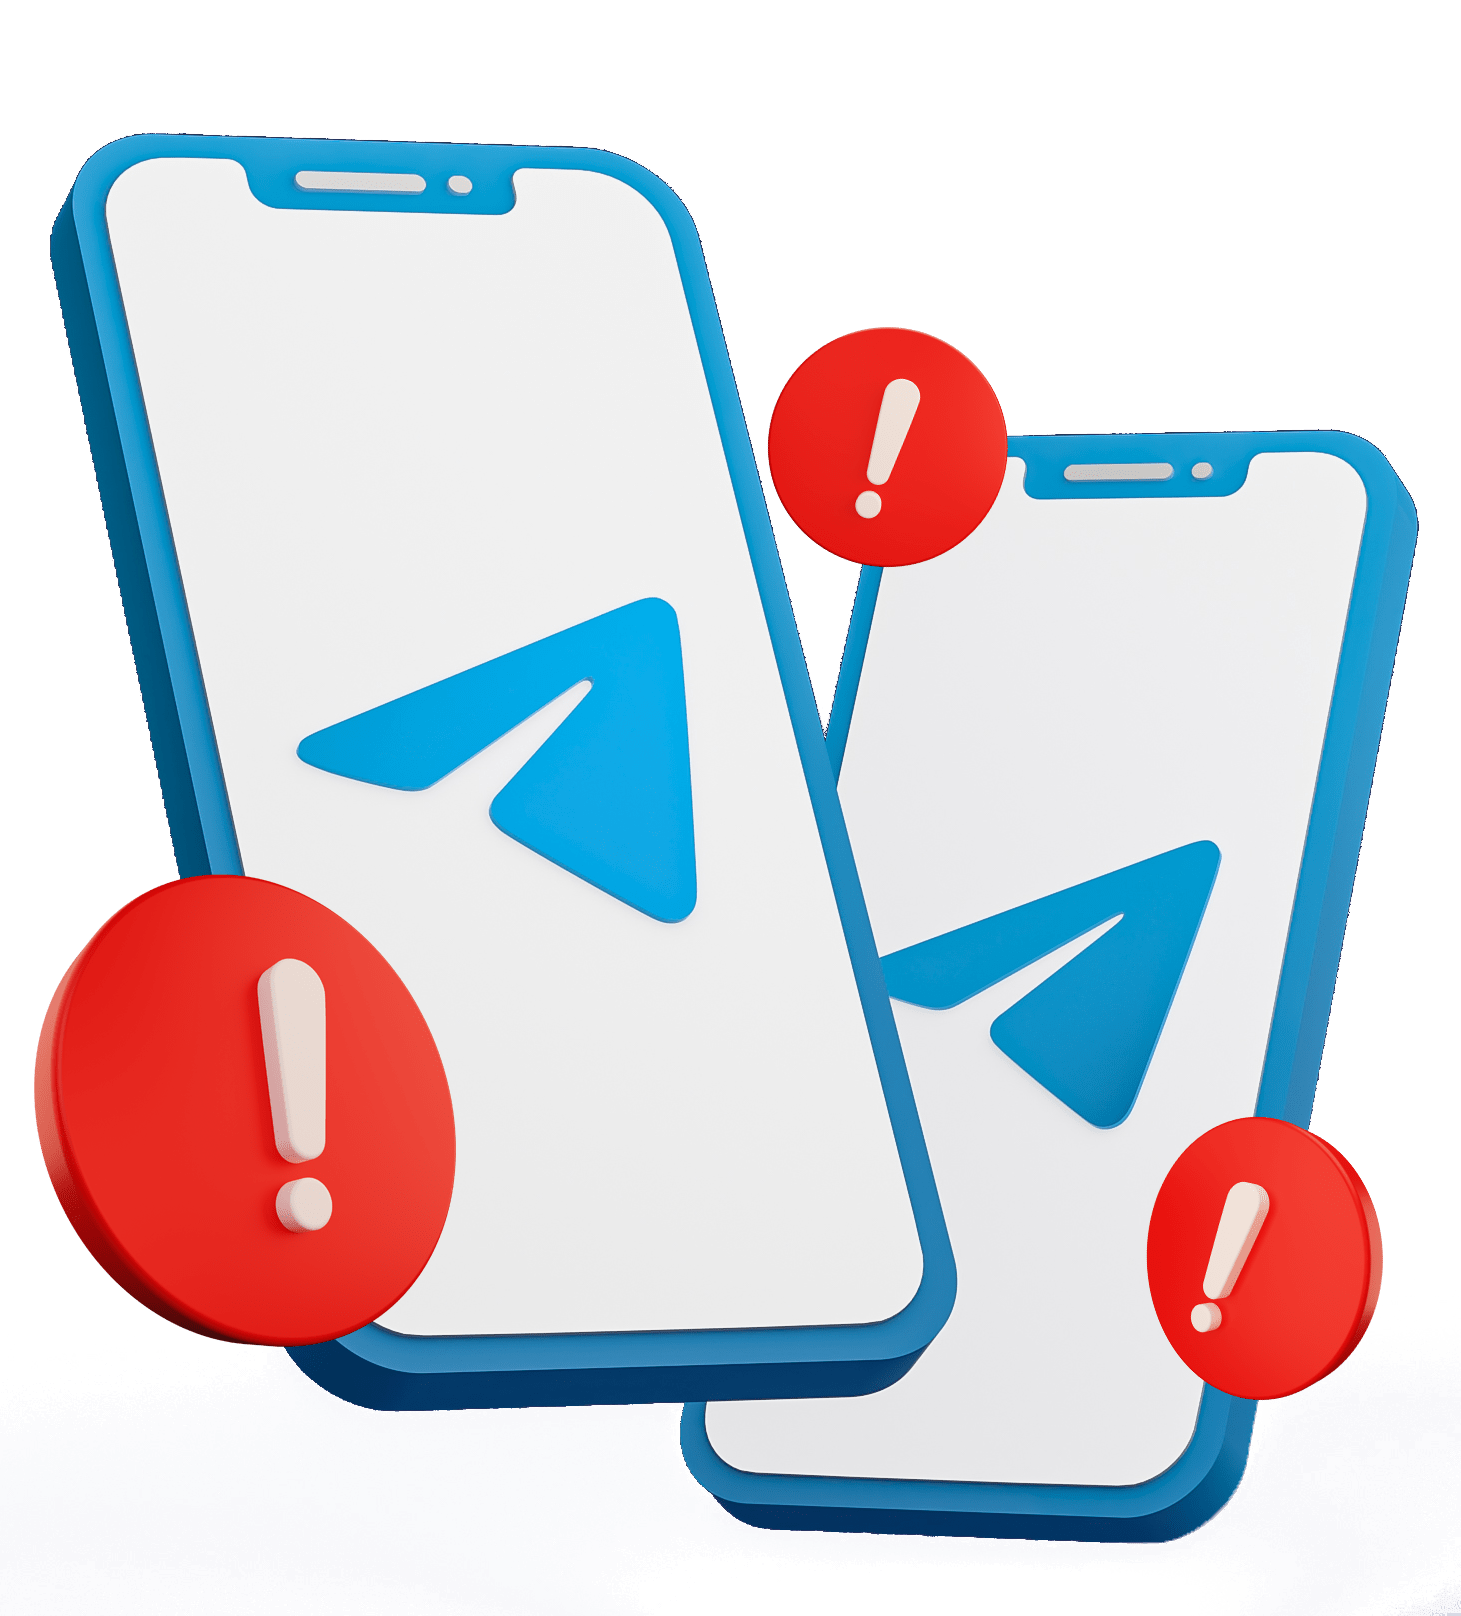 illustration of two iPhones with the Telegram app on them and warning symbols around